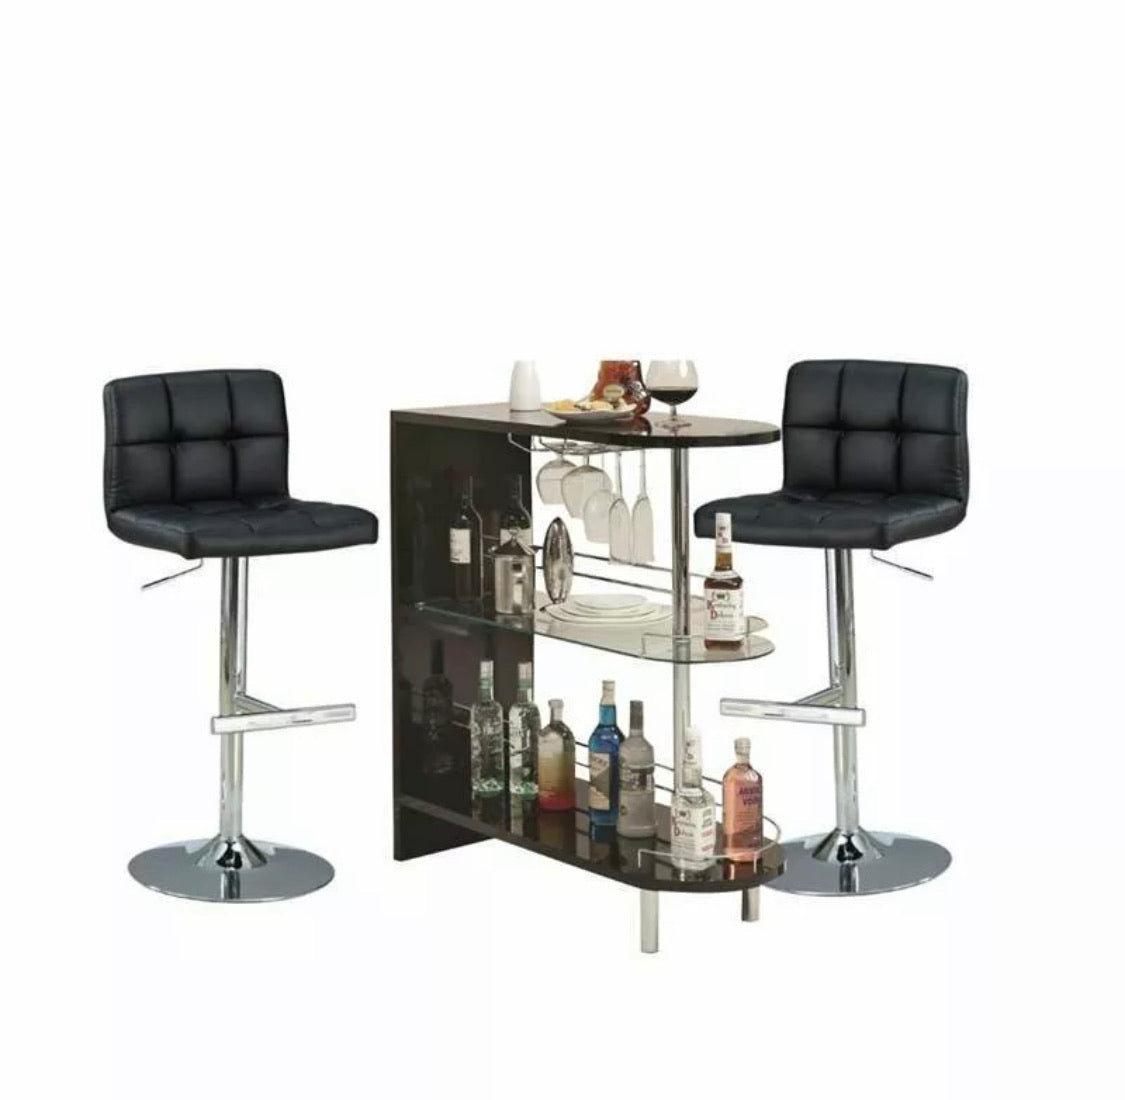 Pub Set with Pub Table and (Set of 2) Bar Stools in Black